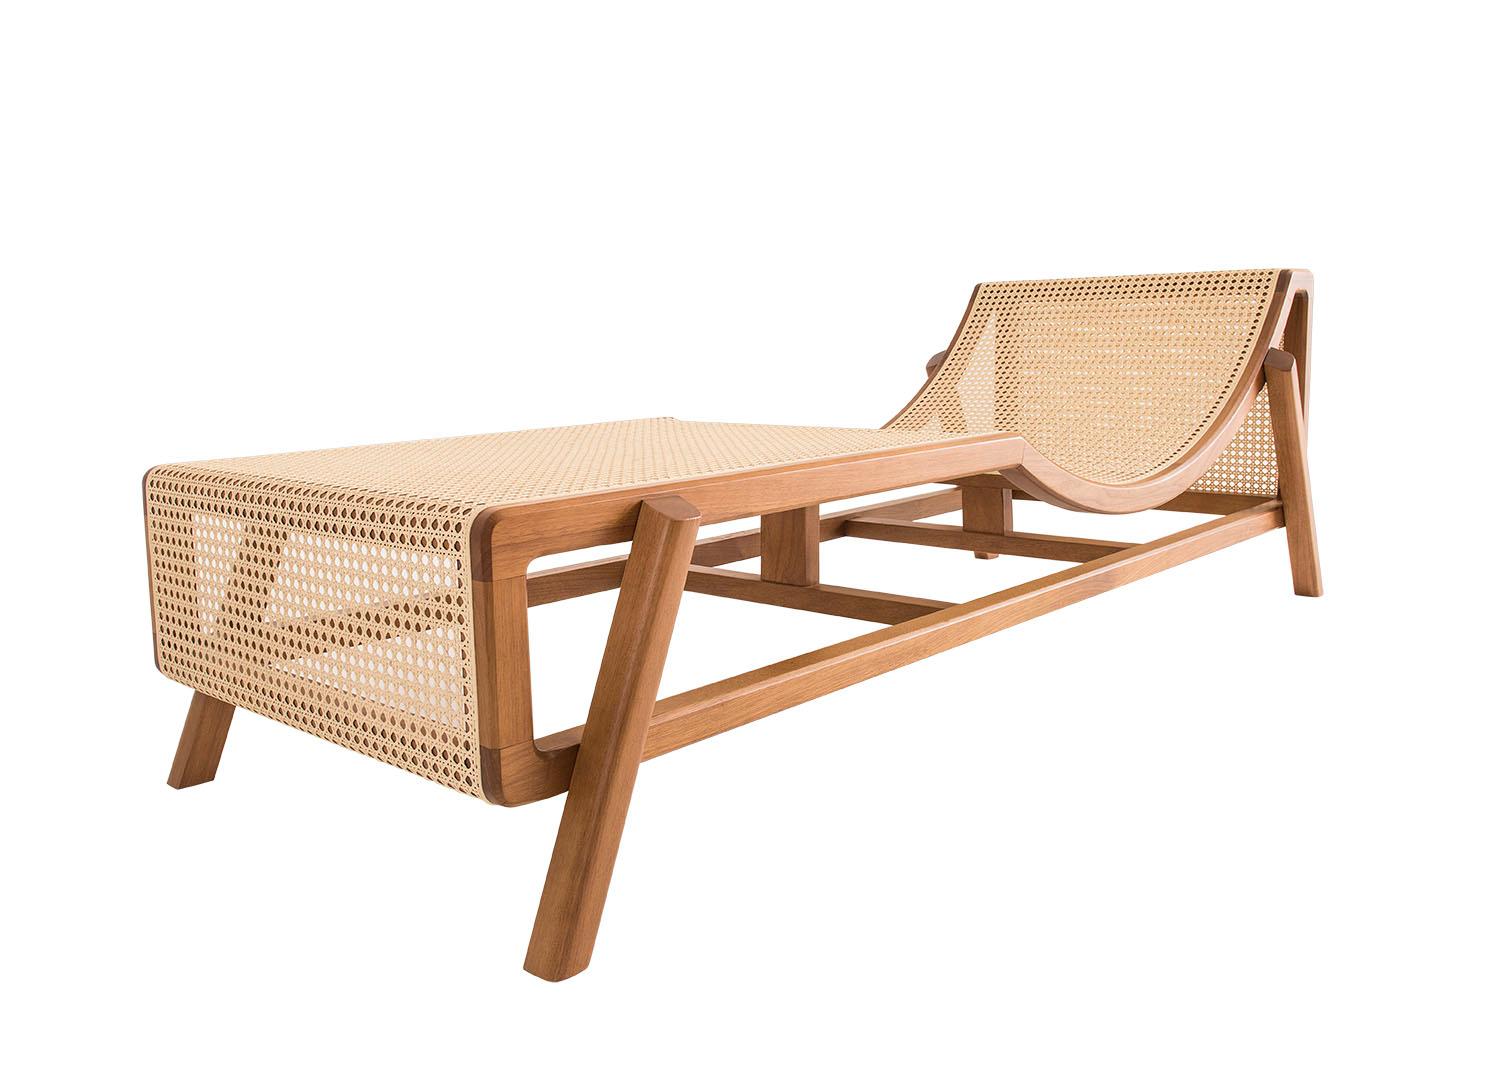 Chaise longue, flag is made a struture with a natural wood reforested Jequetibá (Brazilian wood) and natural hexagonal cotton straw, handmade.

Product indicated for internal use.